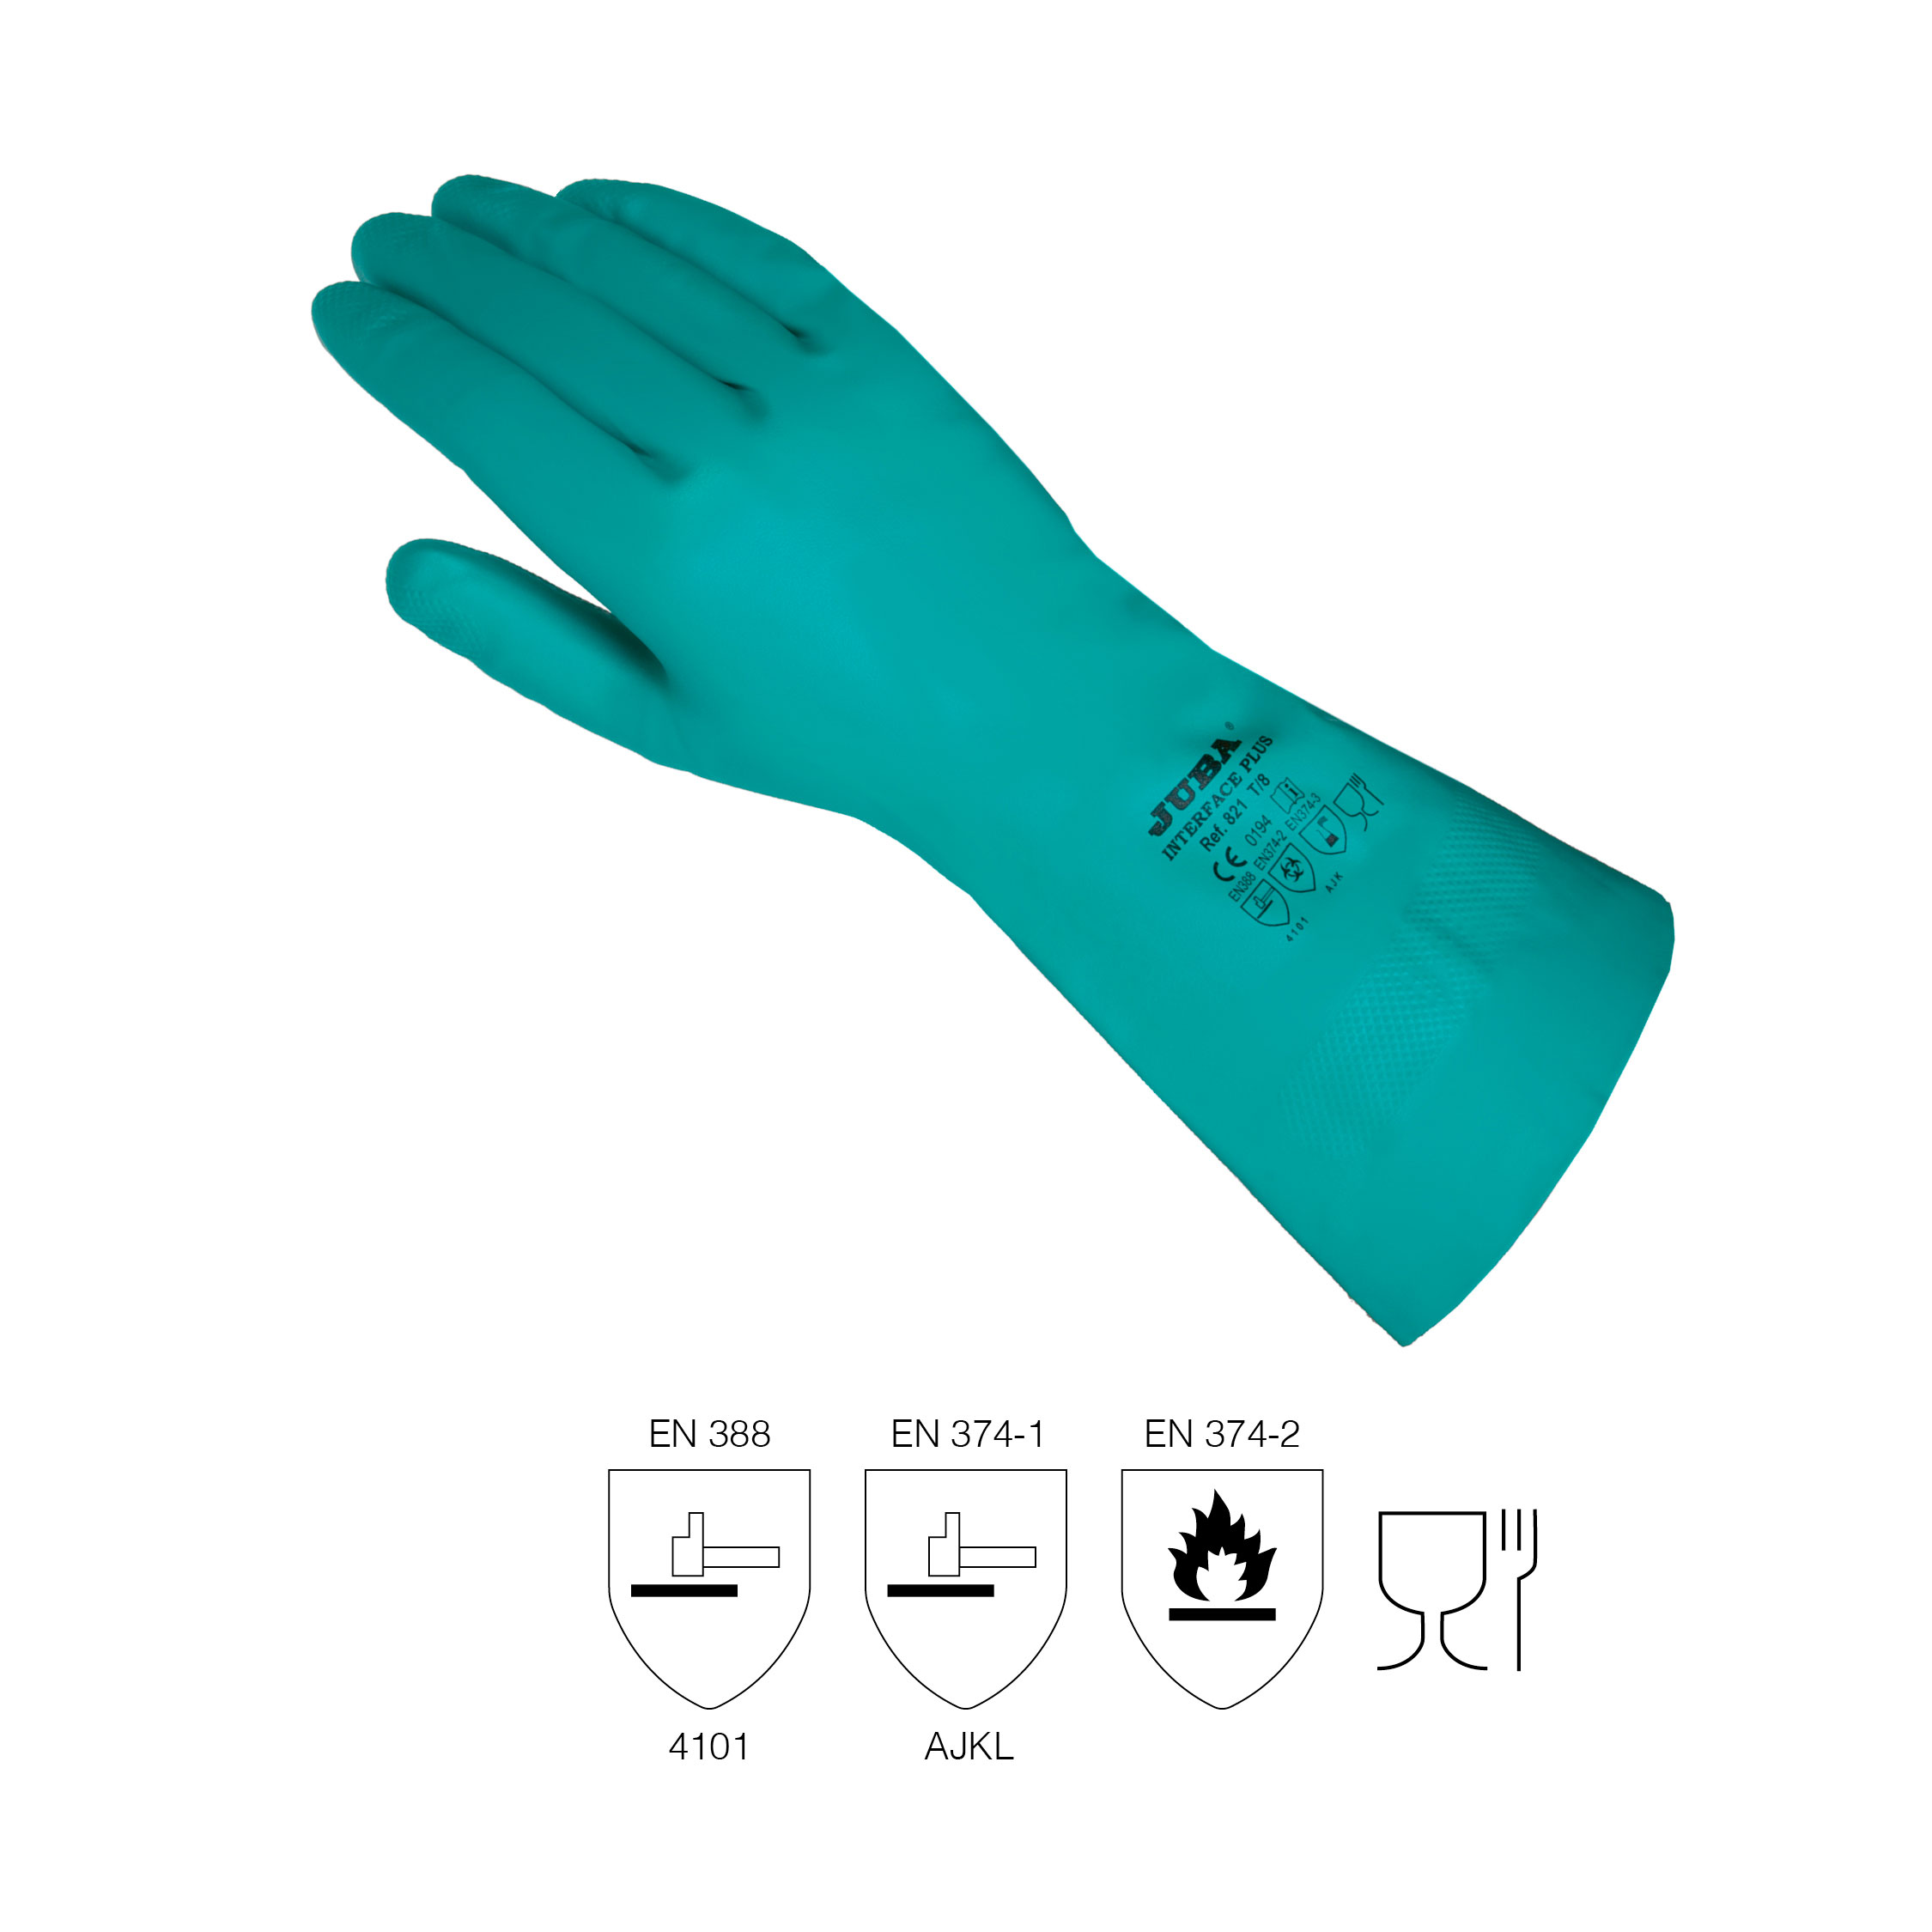 Unsupported nitrile gloves